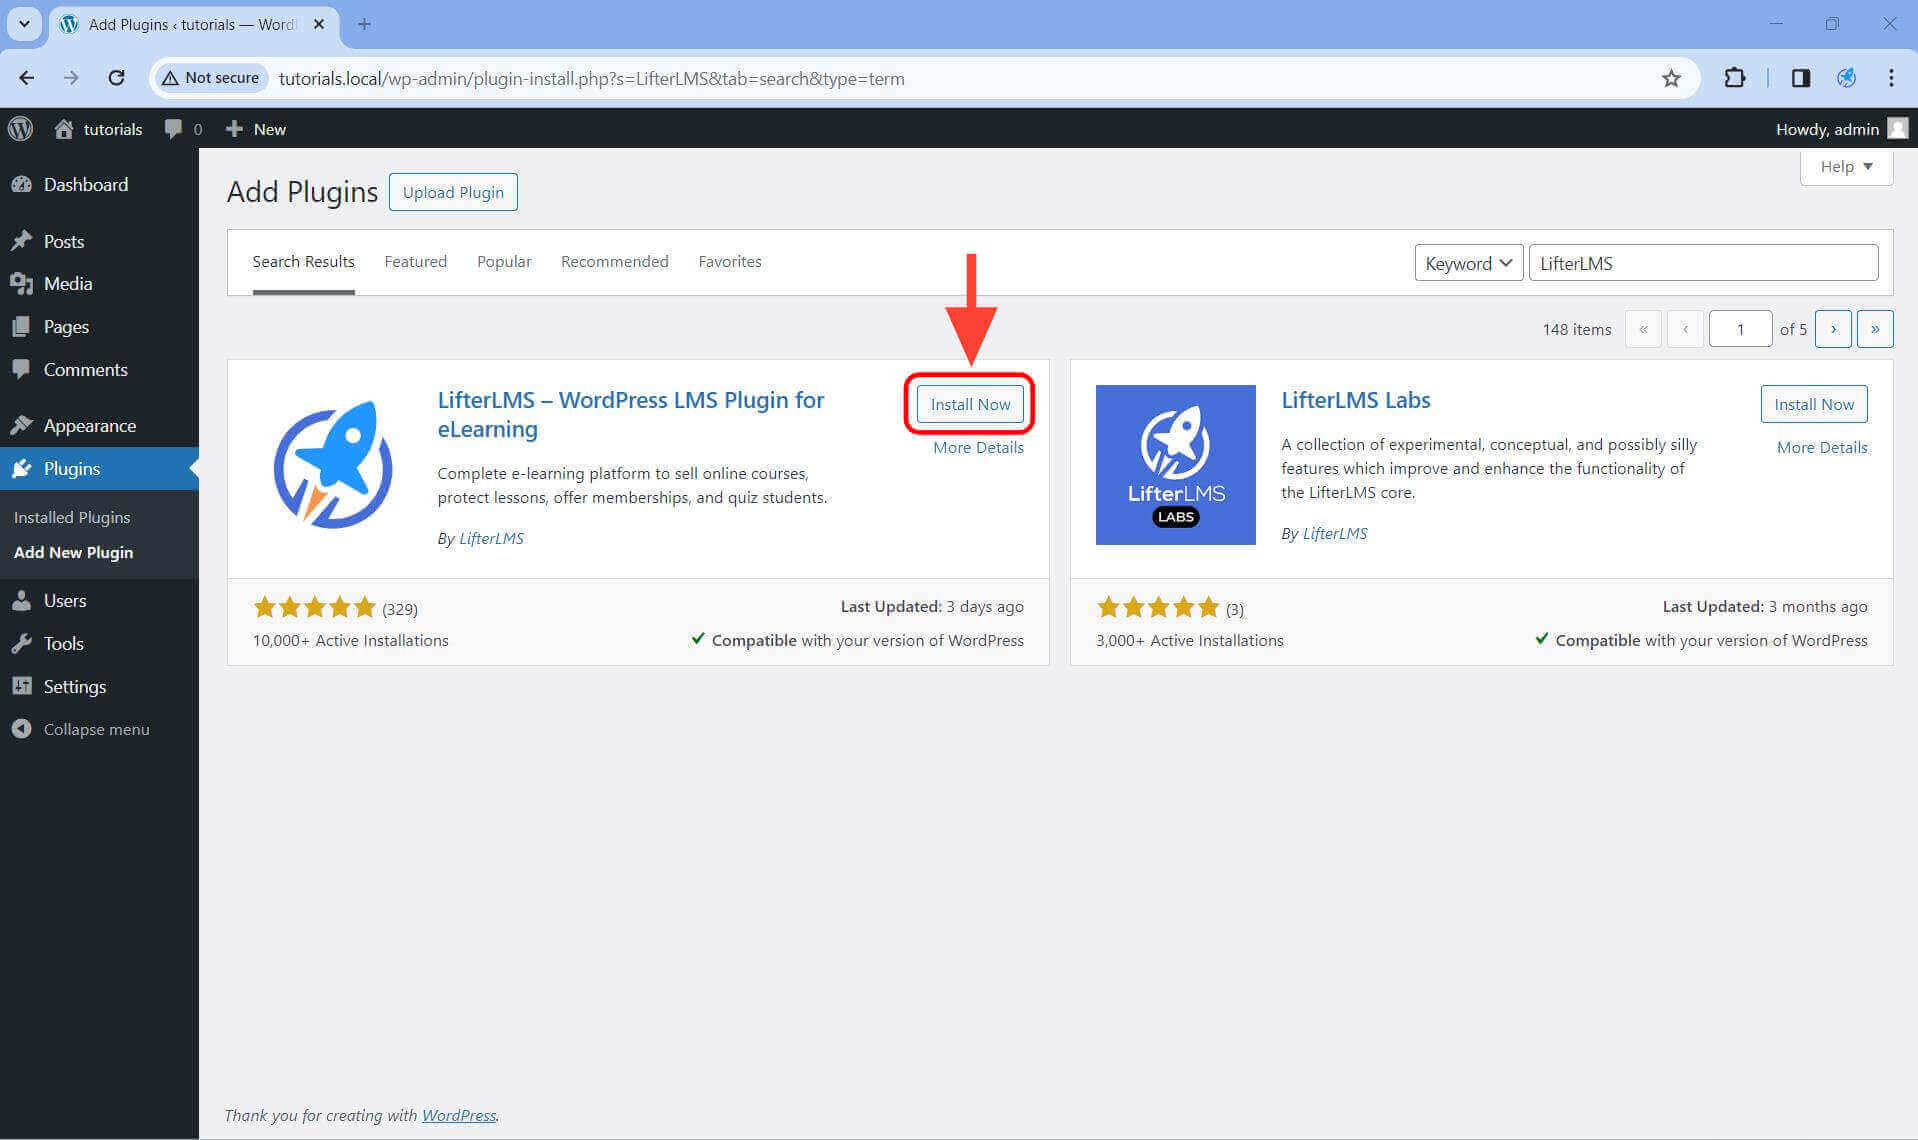 On the search results, locate LifterLMS and click Install Now.